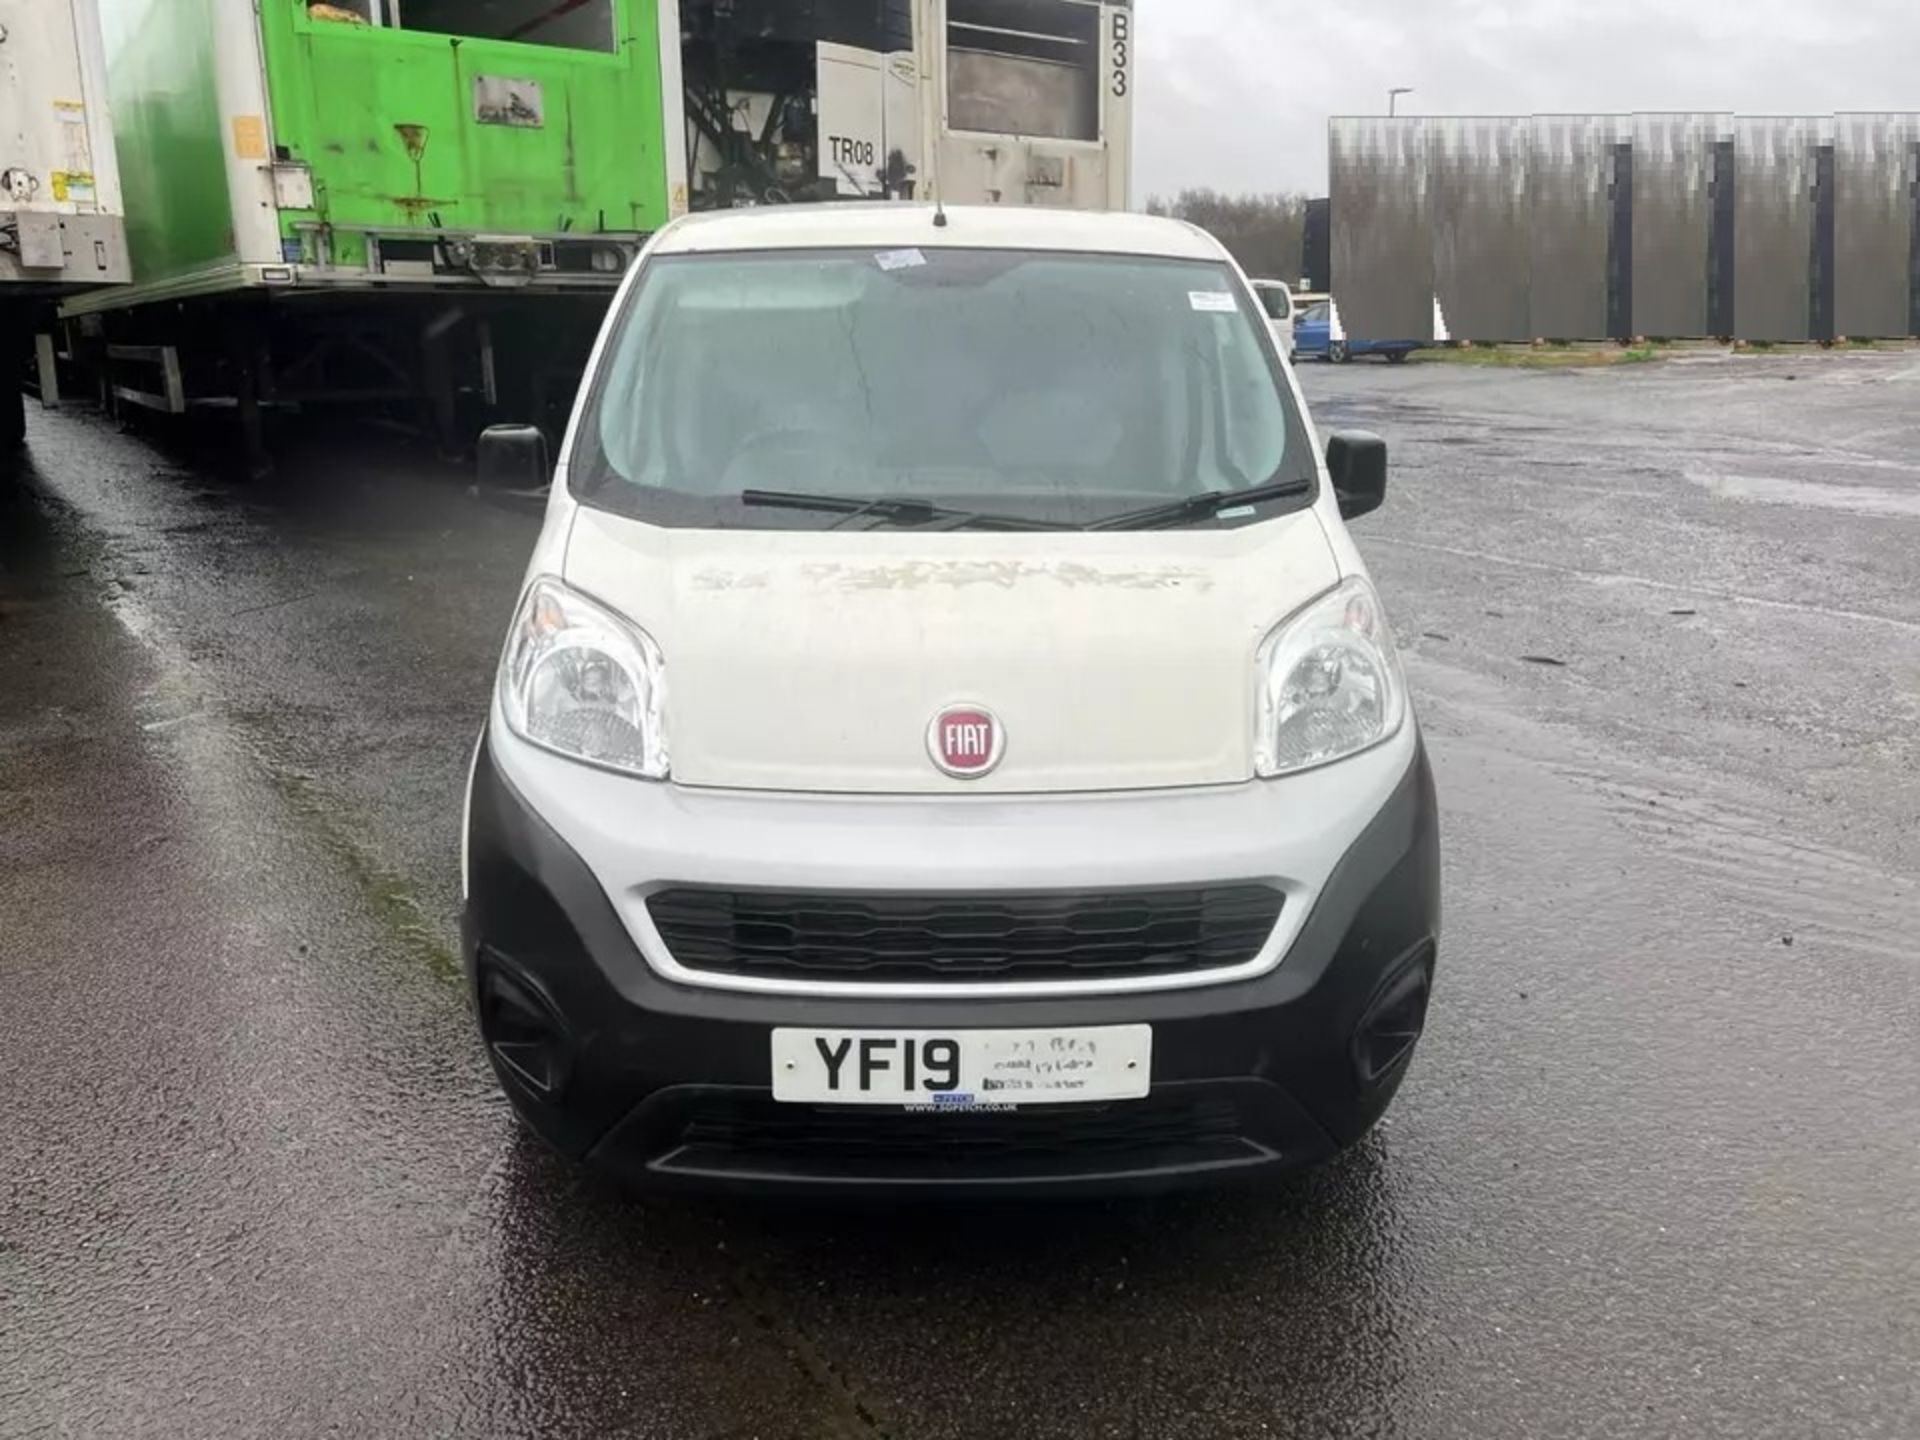 FIAT FIORINO SX 1.3 HDI VAN 2019 - LOADED WITH FEATURES, SOLD FOR SPARES OR REPAIRS - Bild 2 aus 12